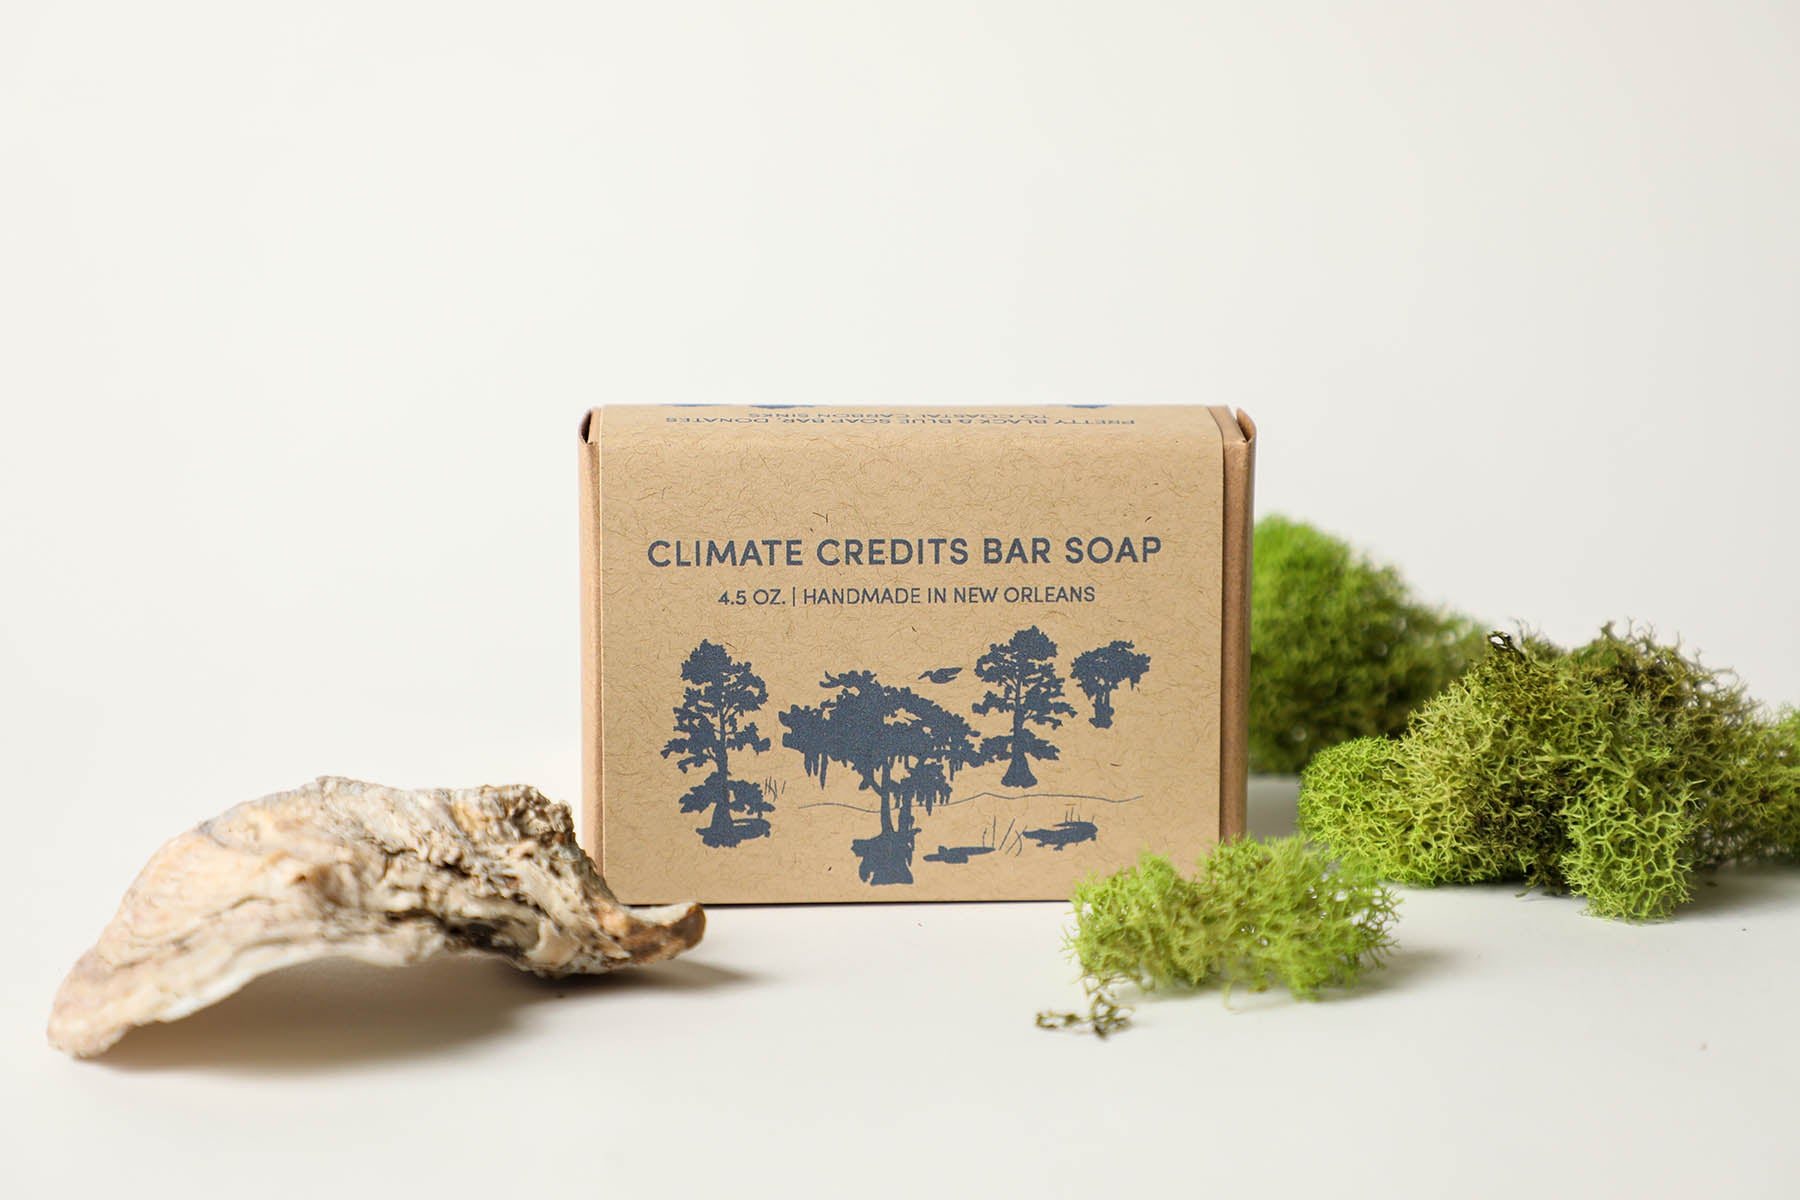 Climate Credits Bar Soap - Gives to Common Ground Relief, Coastal Climate Credits